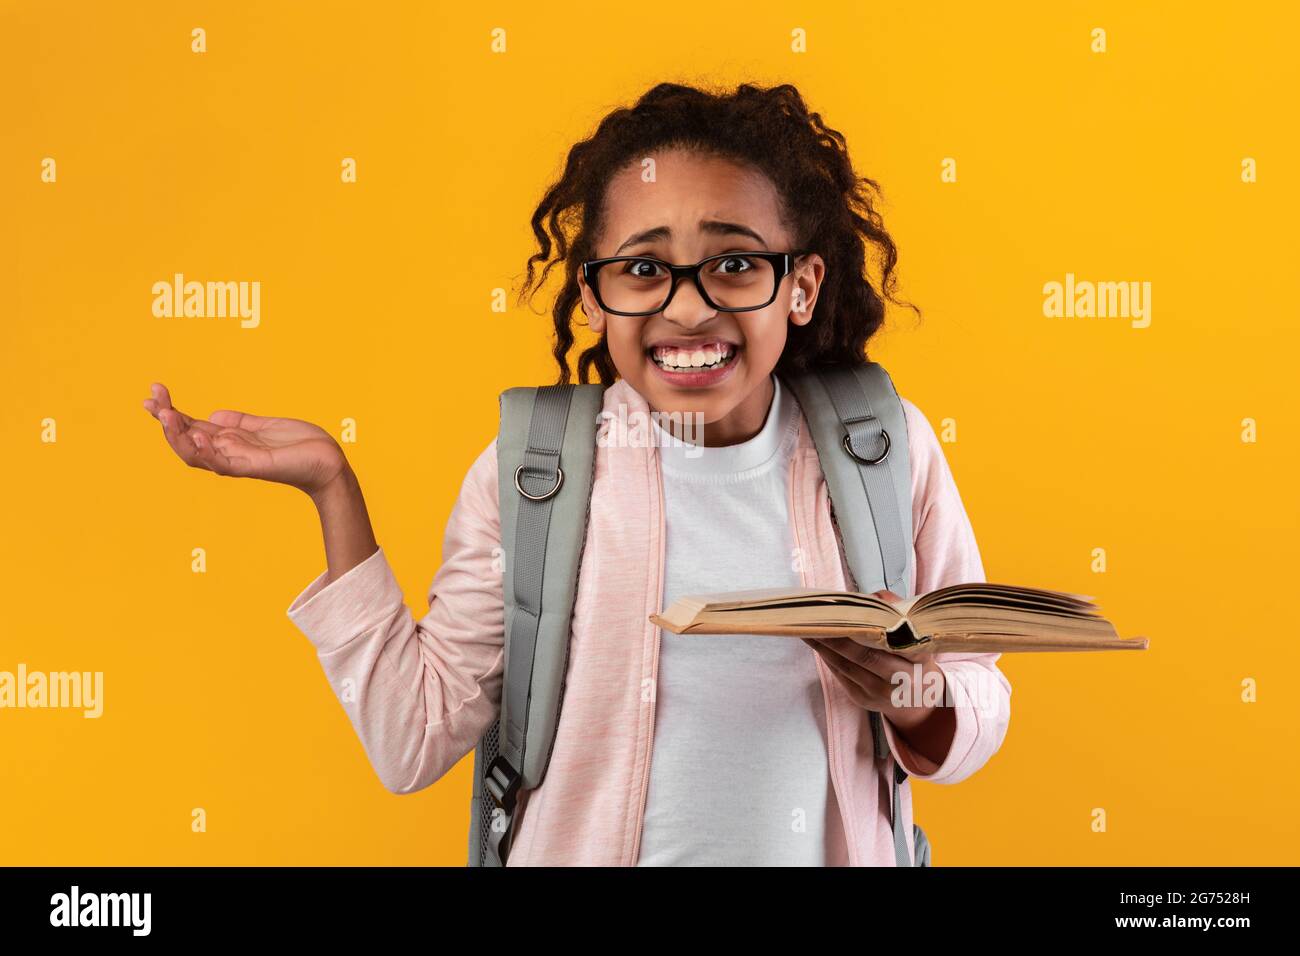 Confused black girl holding open book shrugging shoulders Stock Photo